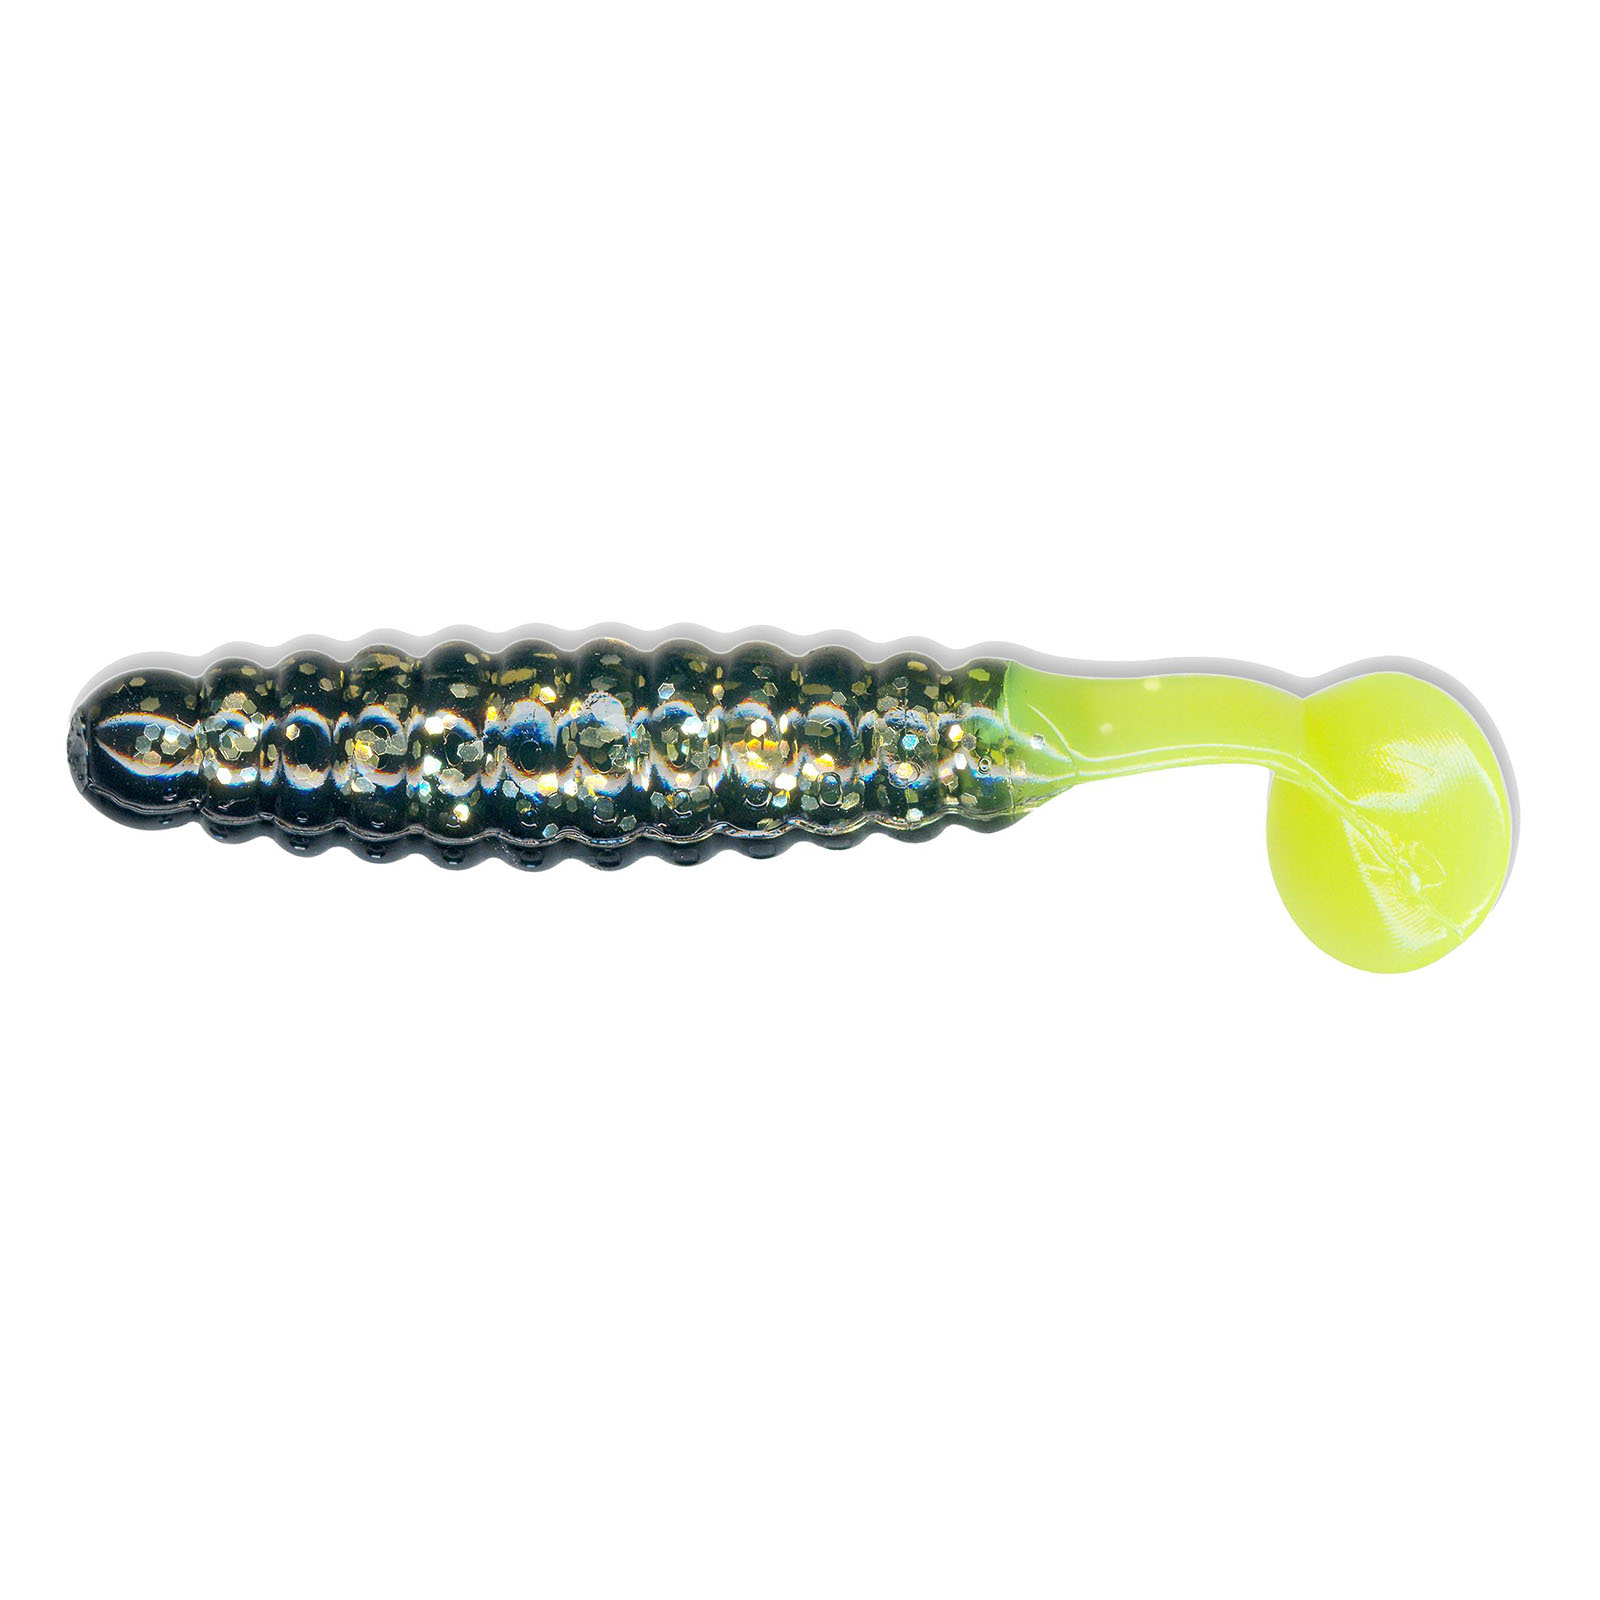 100-3 Bass trout crappie-panfish-red worm-crawlers-drop shot-grub